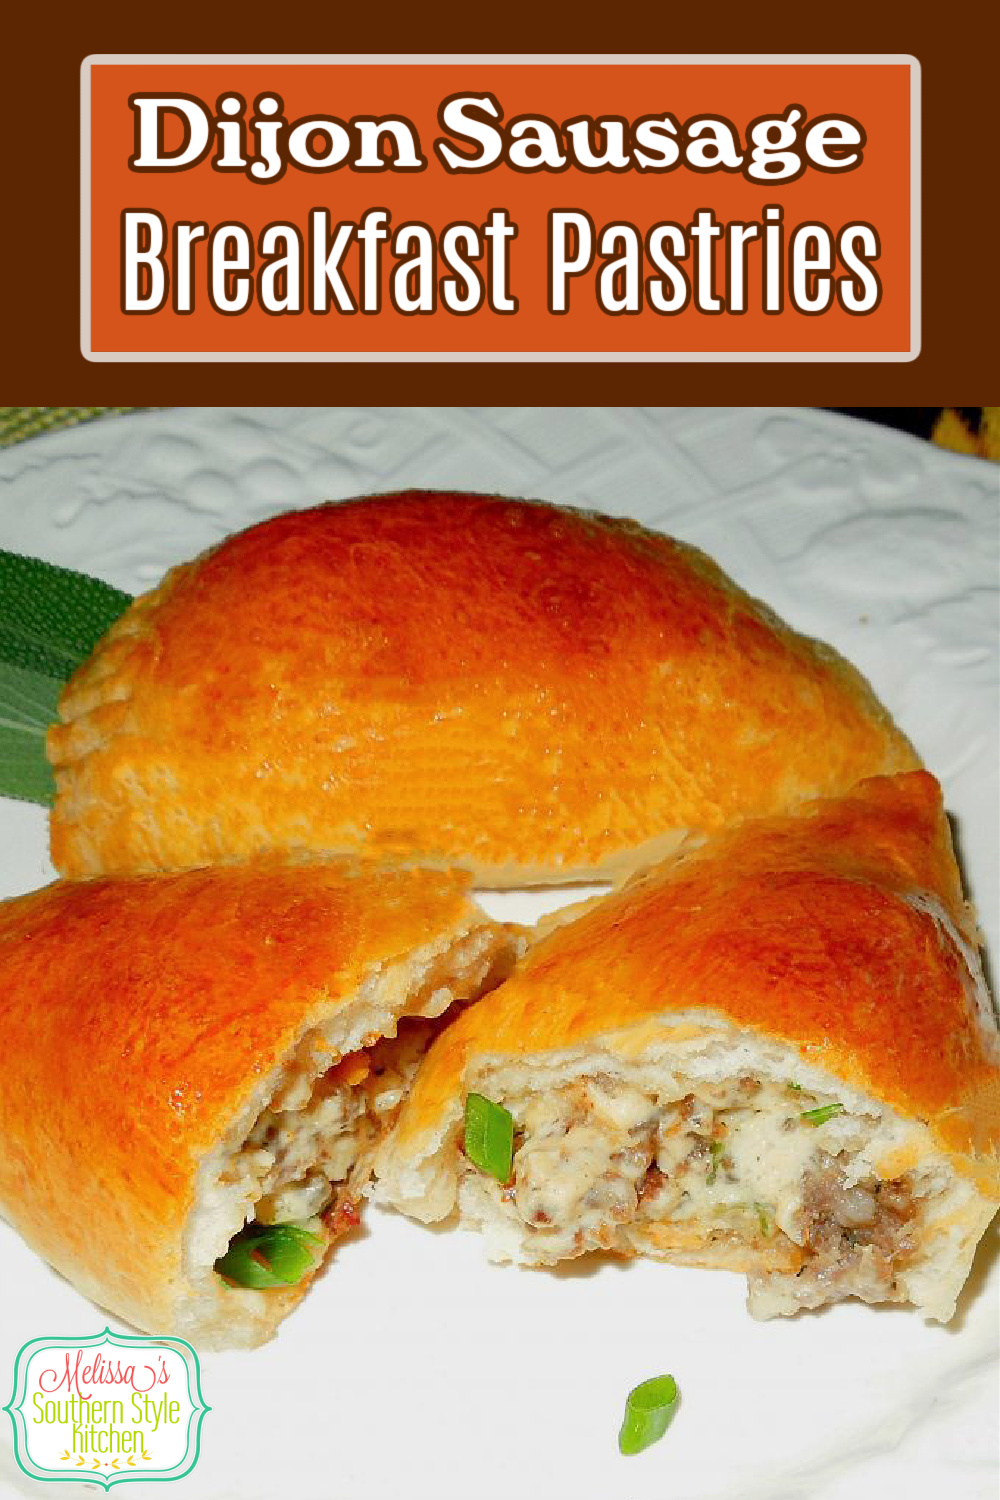 Start your morning with these easy Dijon Sausage Filled Breakfast Pastries #sausagepastries #breakfastpastries #sausagerecipes #brunch #pastries #cannedbiscuitrecipes #dijonsausagepastries #easyrecipes #southernfood #southernrecipes #breakfastrecipes #breakfast